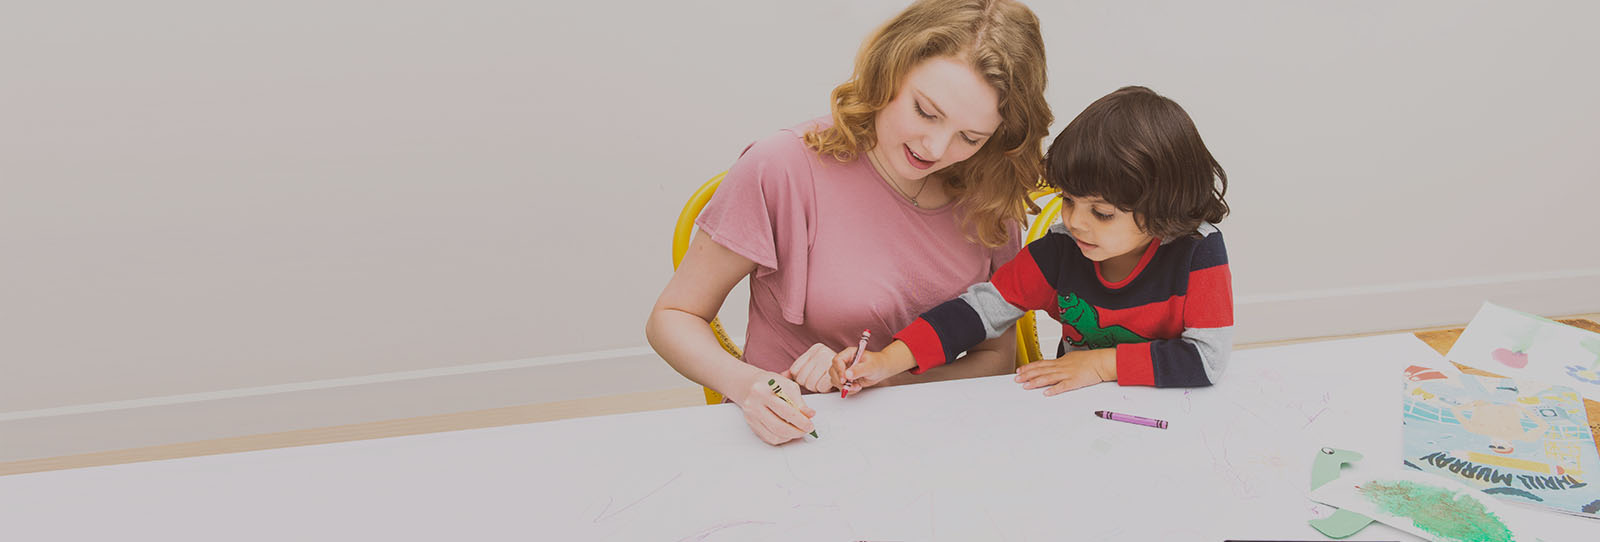 Au Pair and Child Coloring